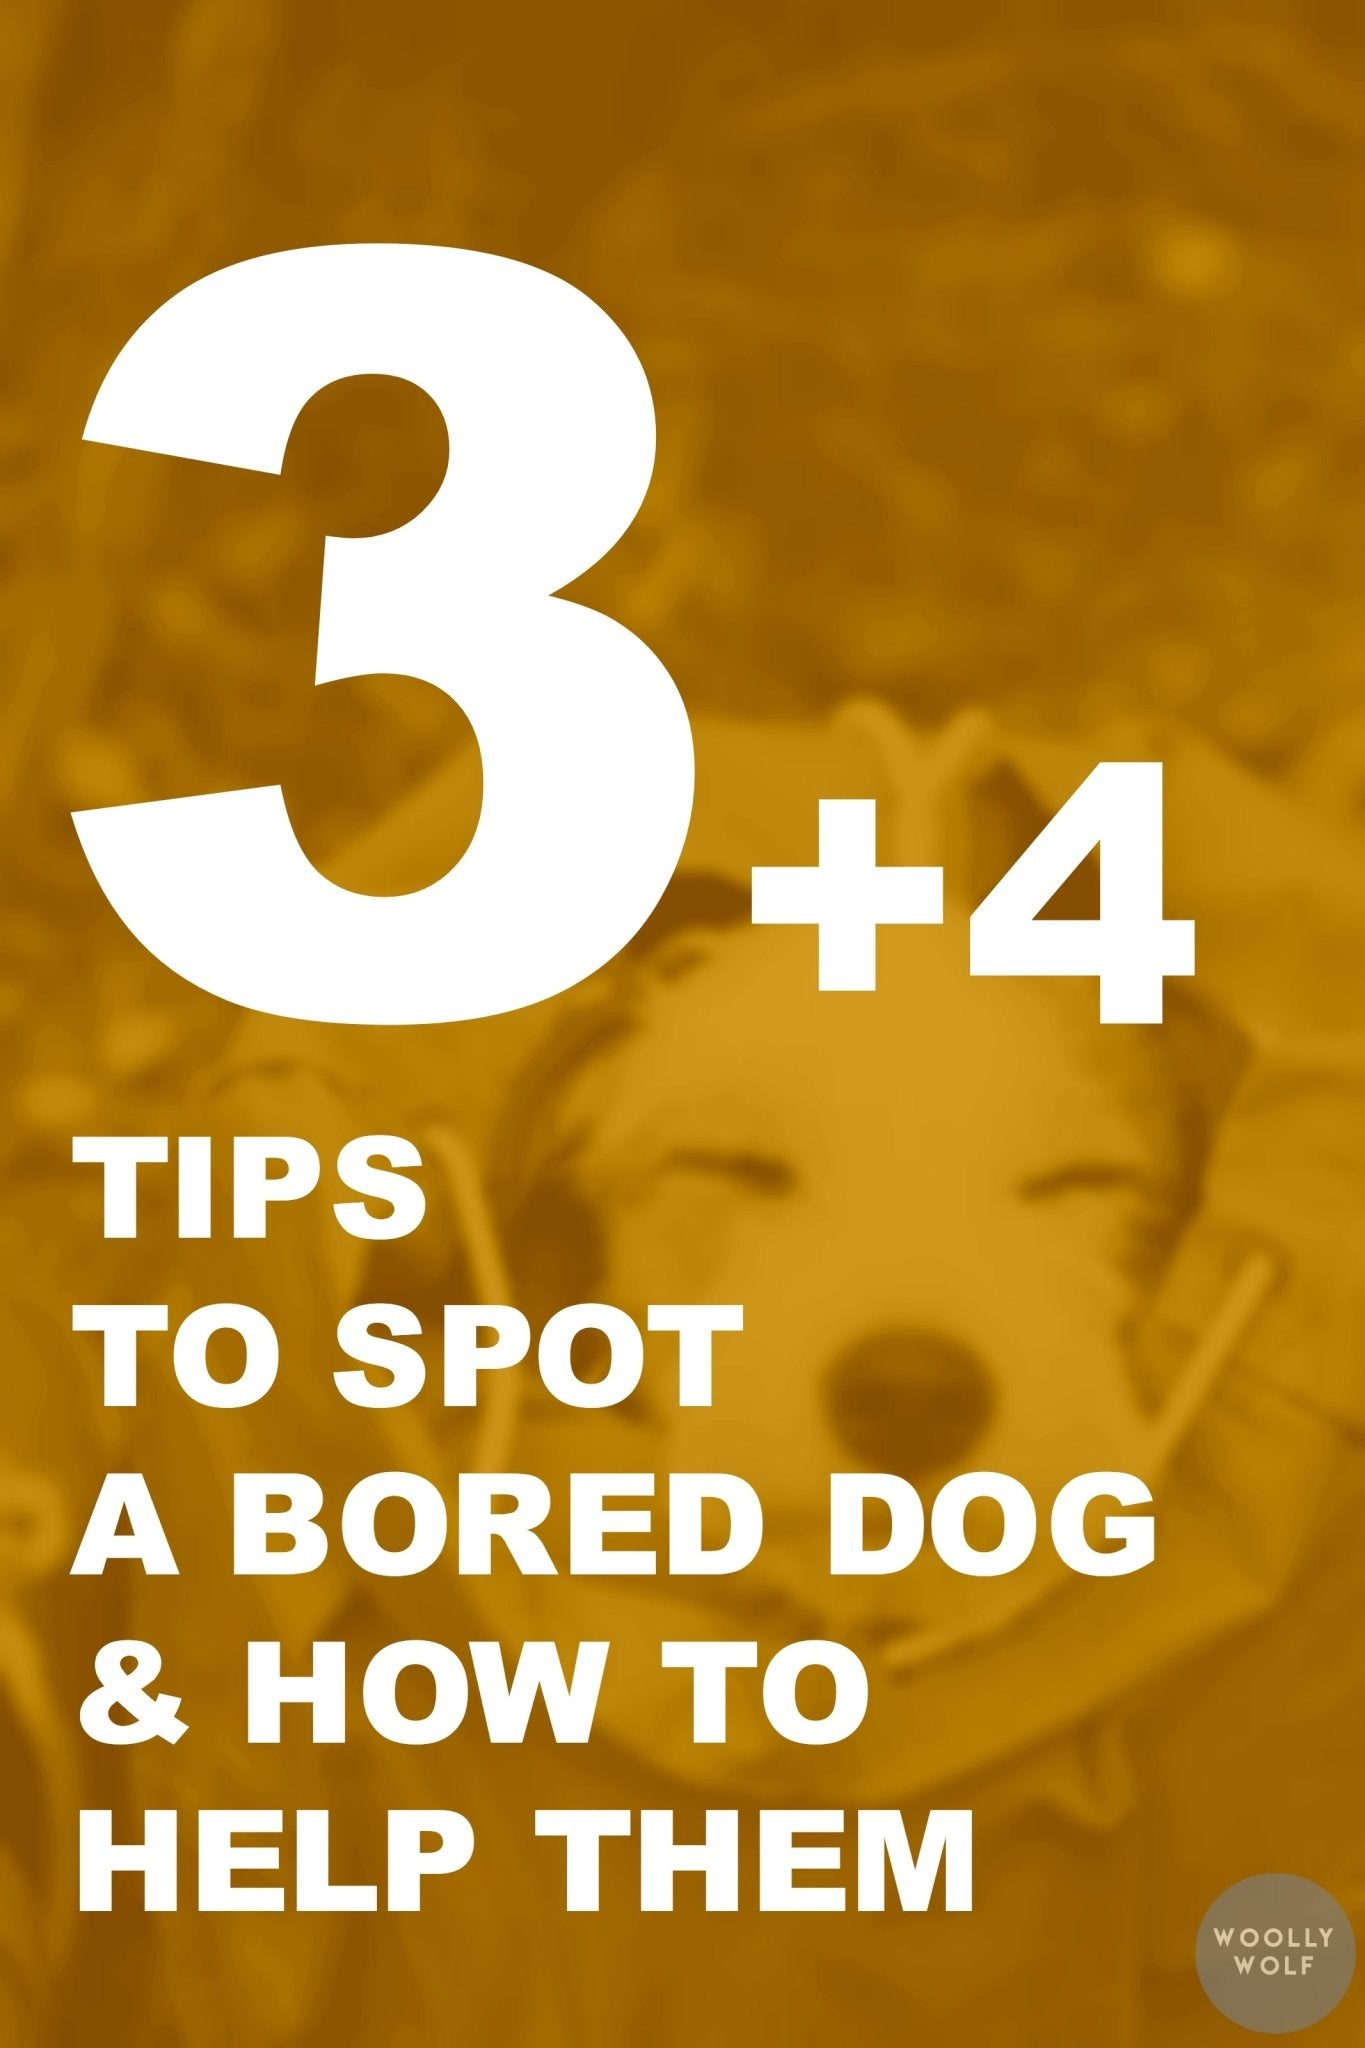 3+4 Tips to Spot a Bored Dog & How to Help Them - Woolly Wolf